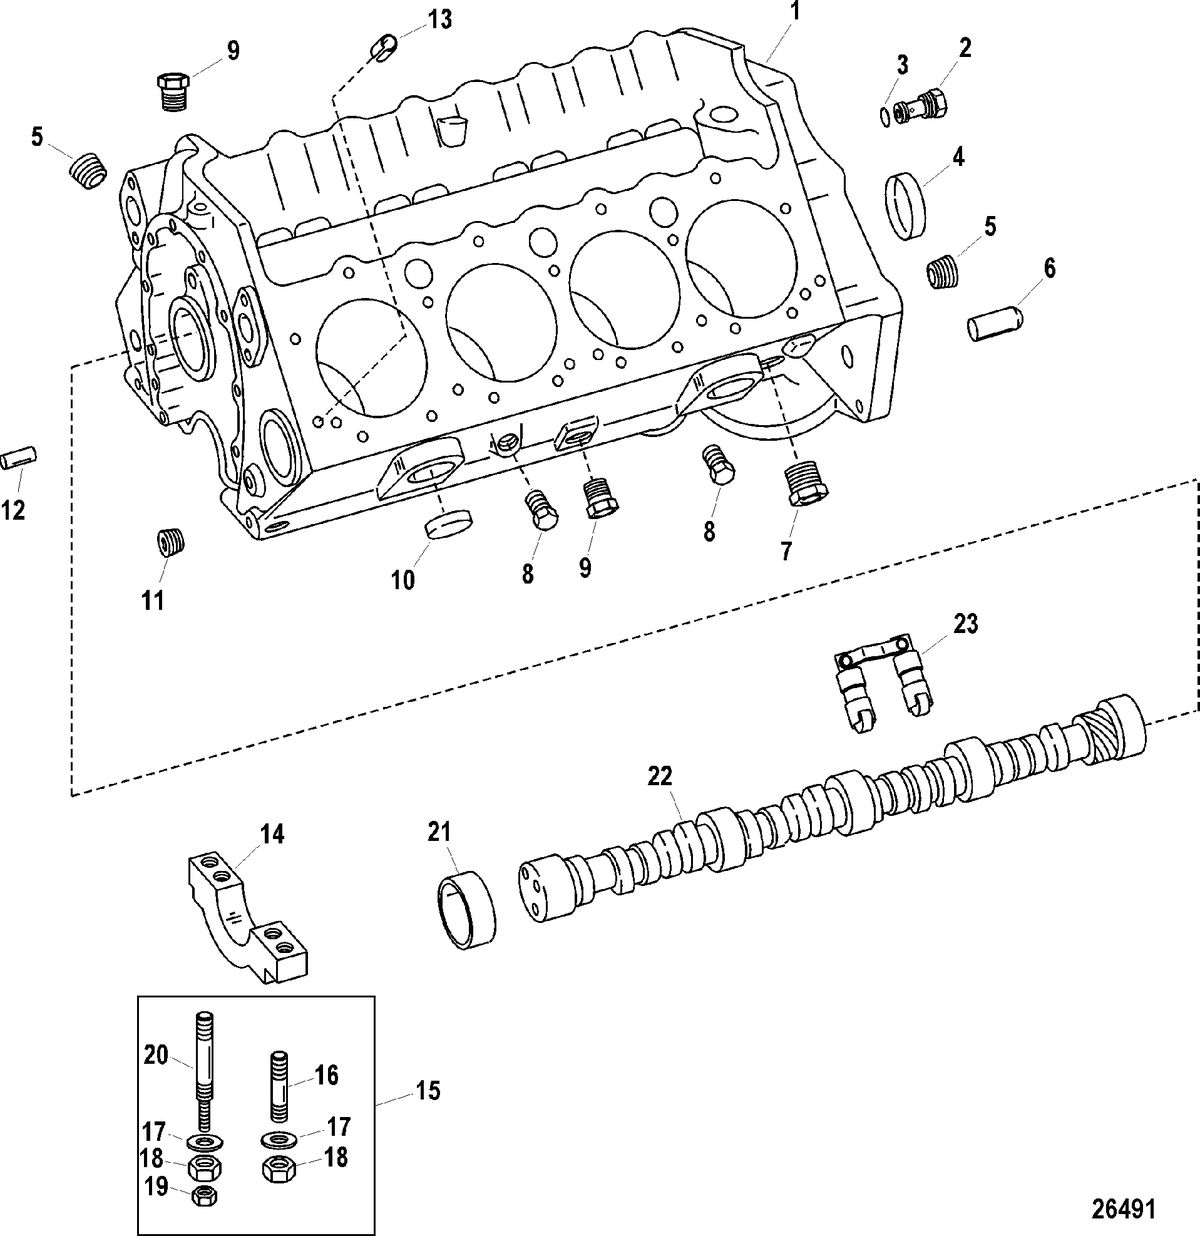 RACE STERNDRIVE 900 SC Cylinder Block And Camshaft